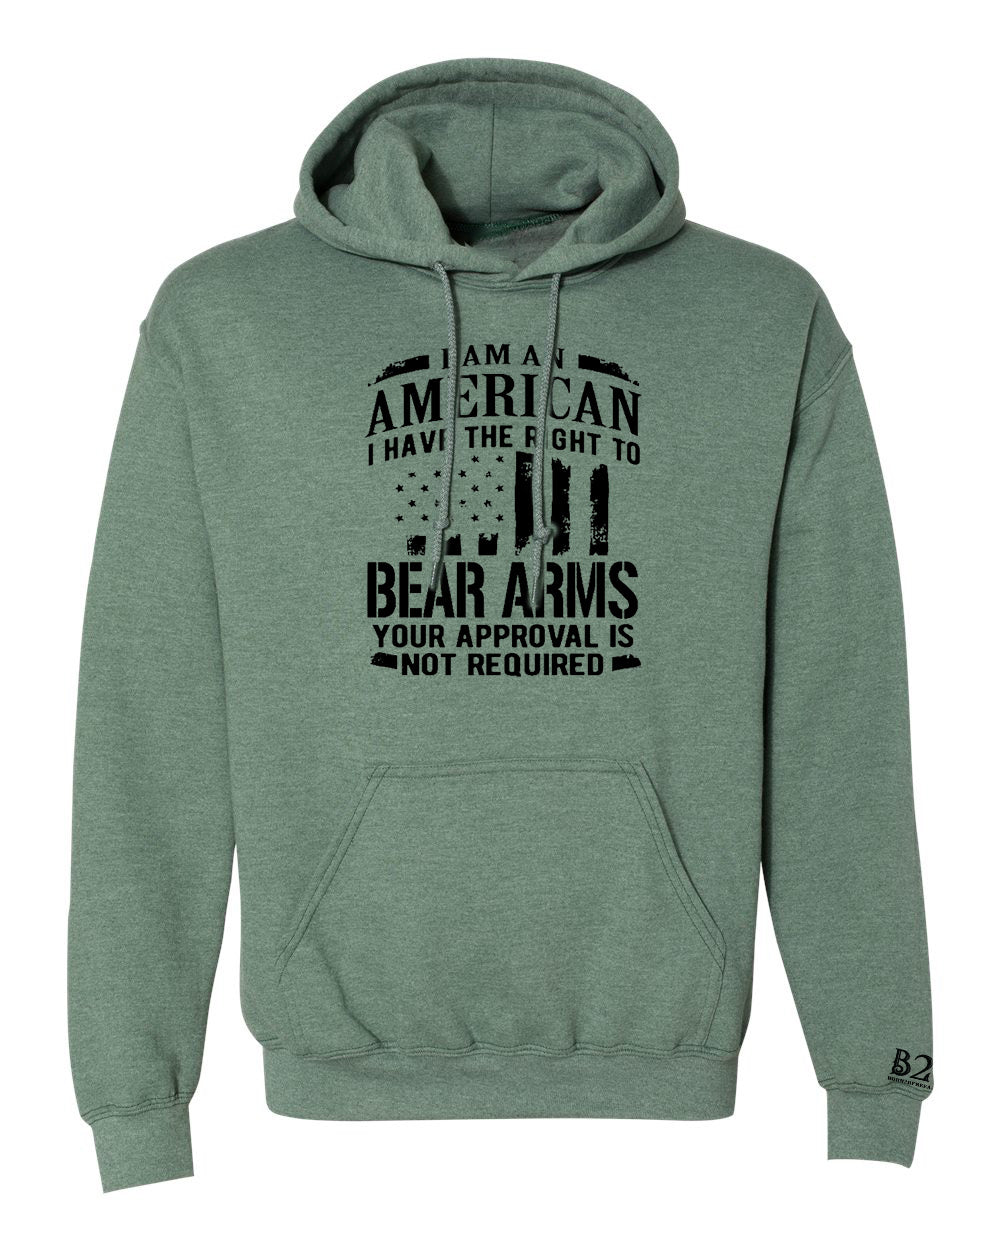 Right To Bear Arms - No Approval